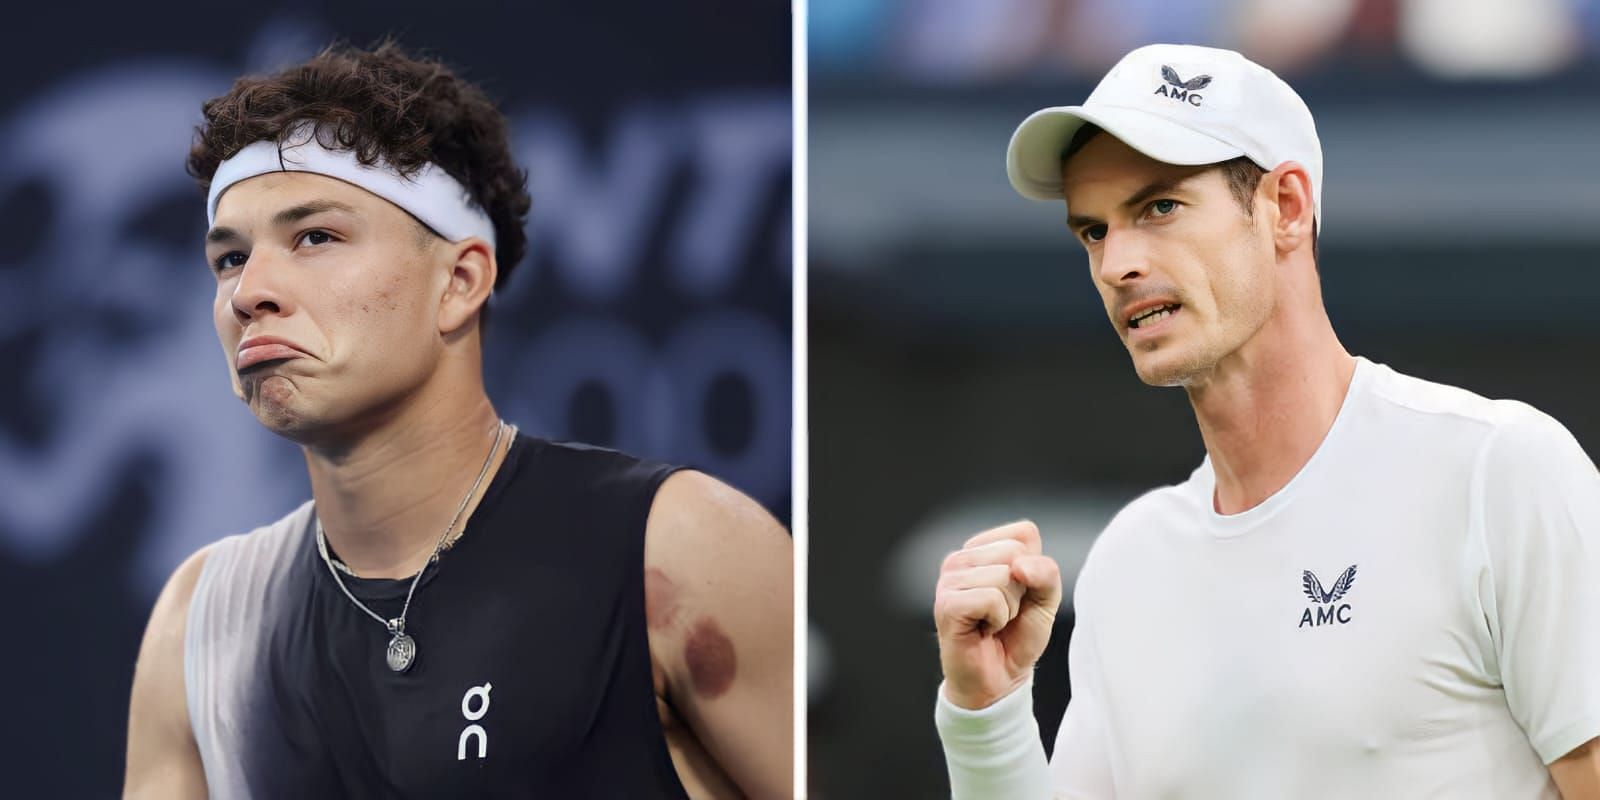 Ben Shelton and Andy Murray face off in a fun off court challenge